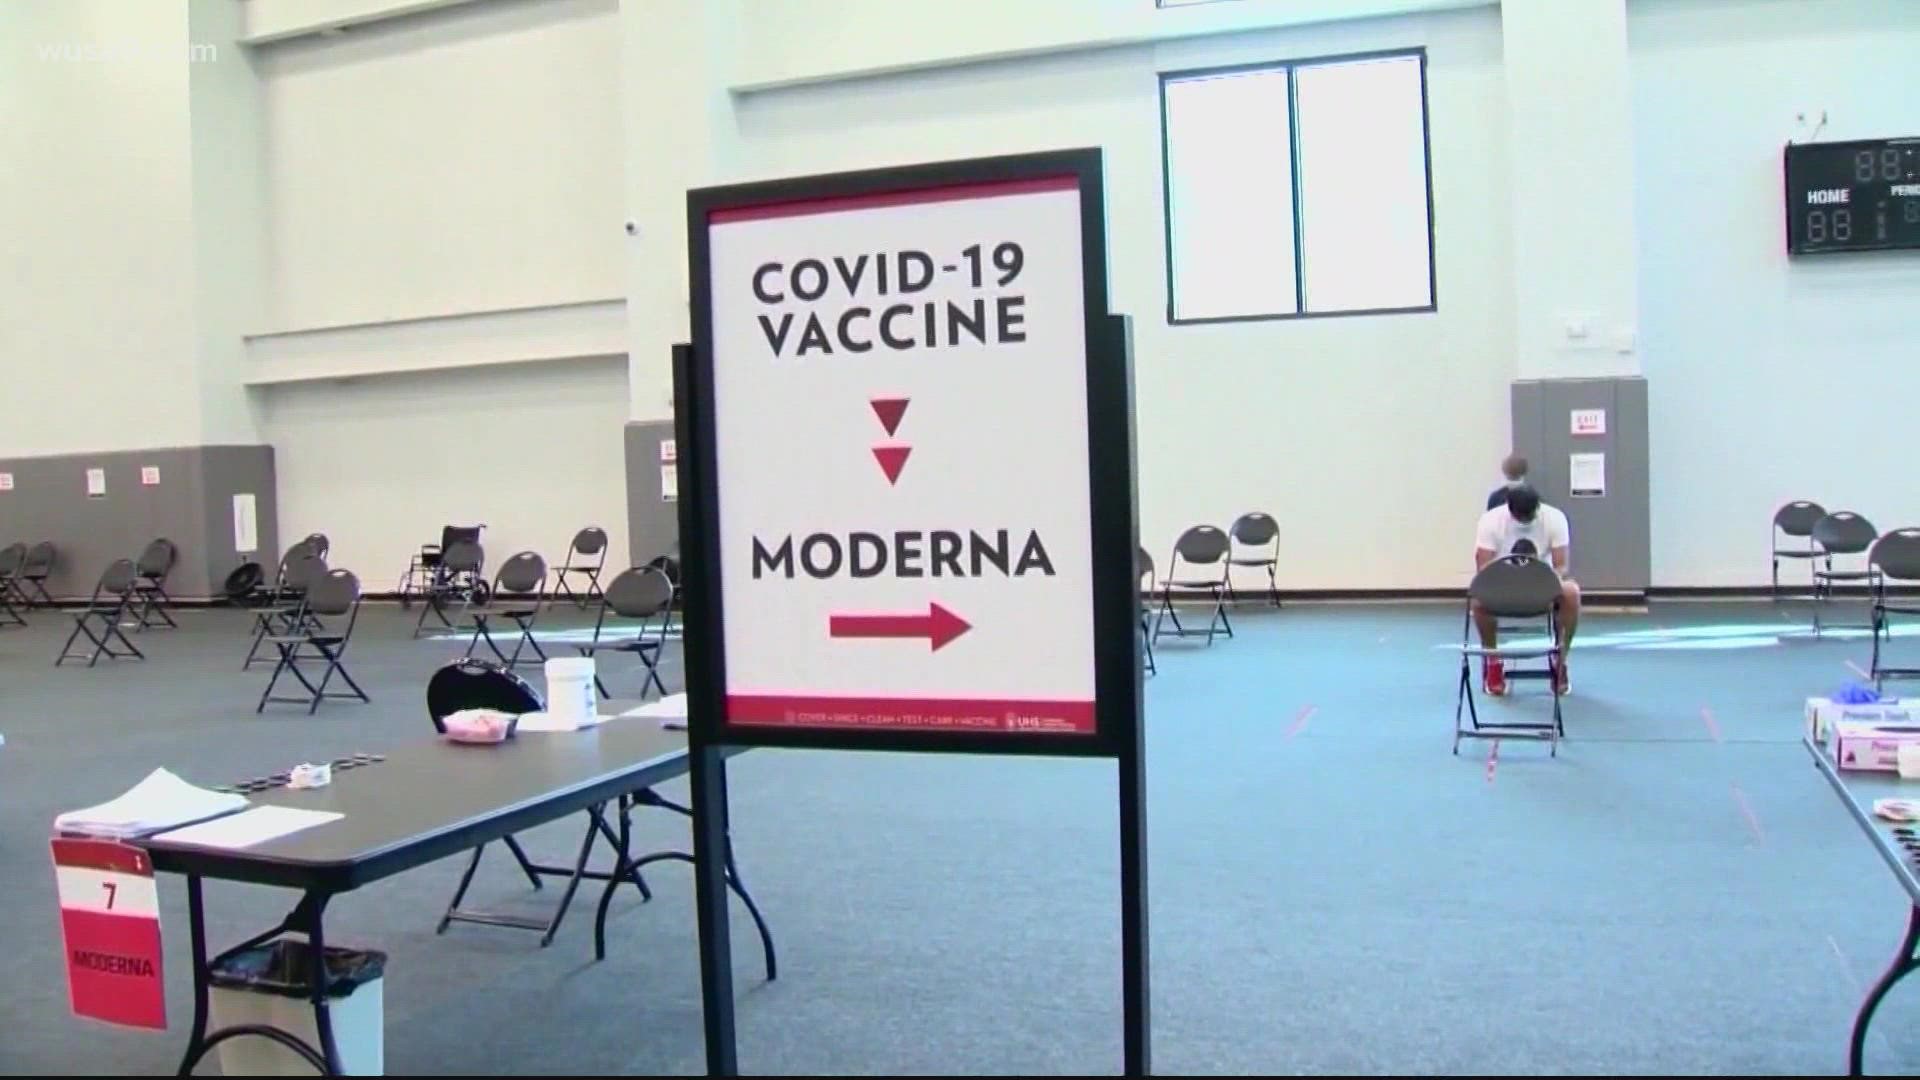 On Monday, data showed the seven-day moving average of COVID-19 vaccine doses administered in Virginia had risen sharply over the past few days.